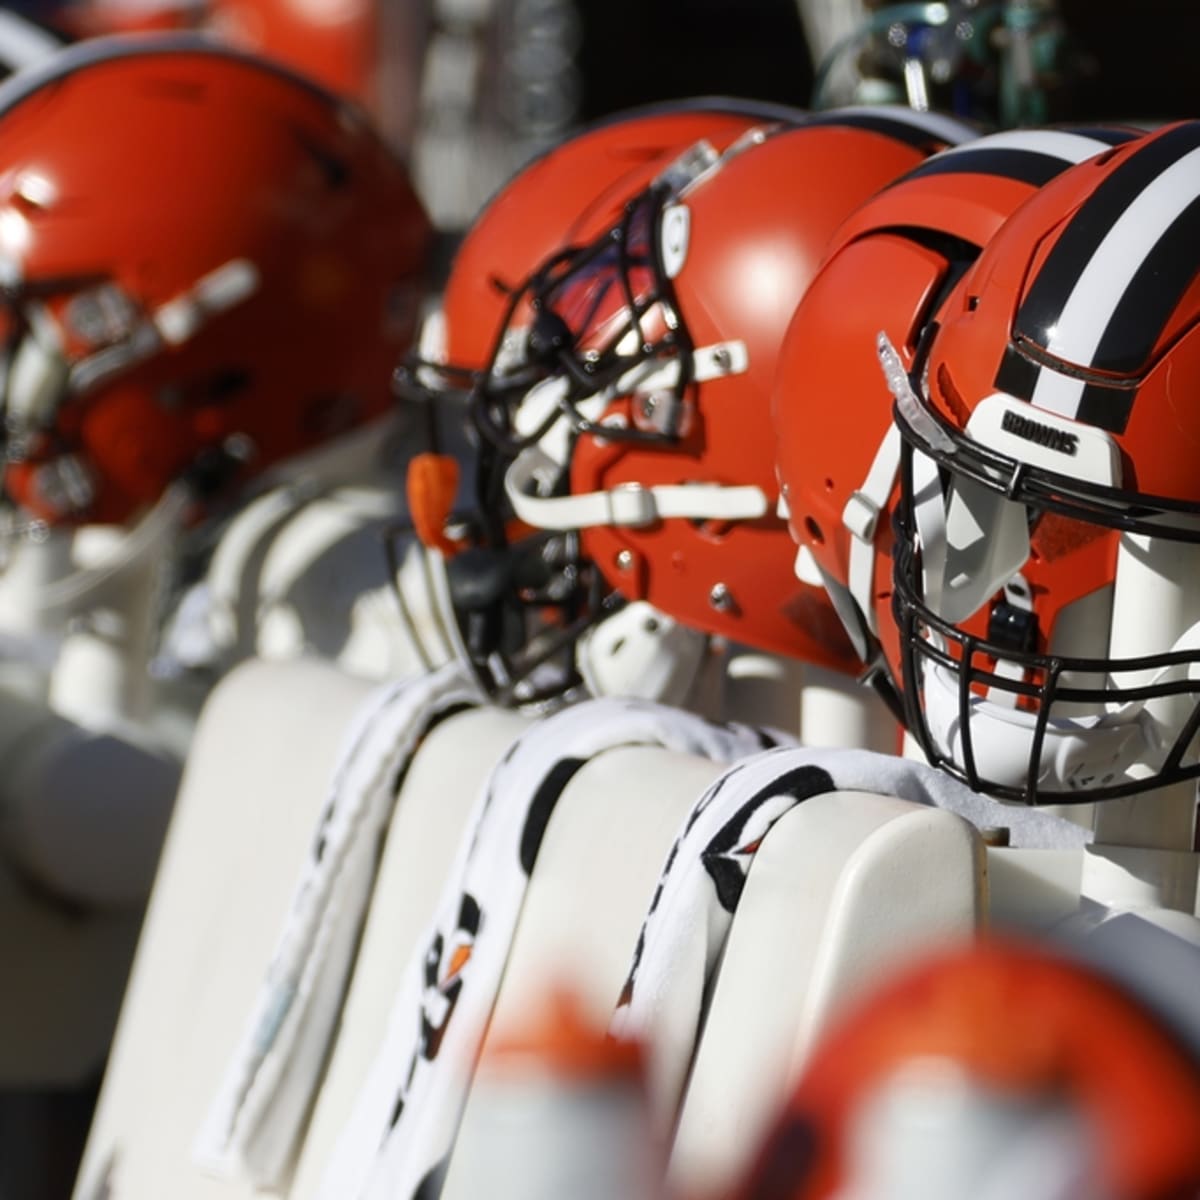 Cleveland Browns  Latest News, Stats, Game Reports